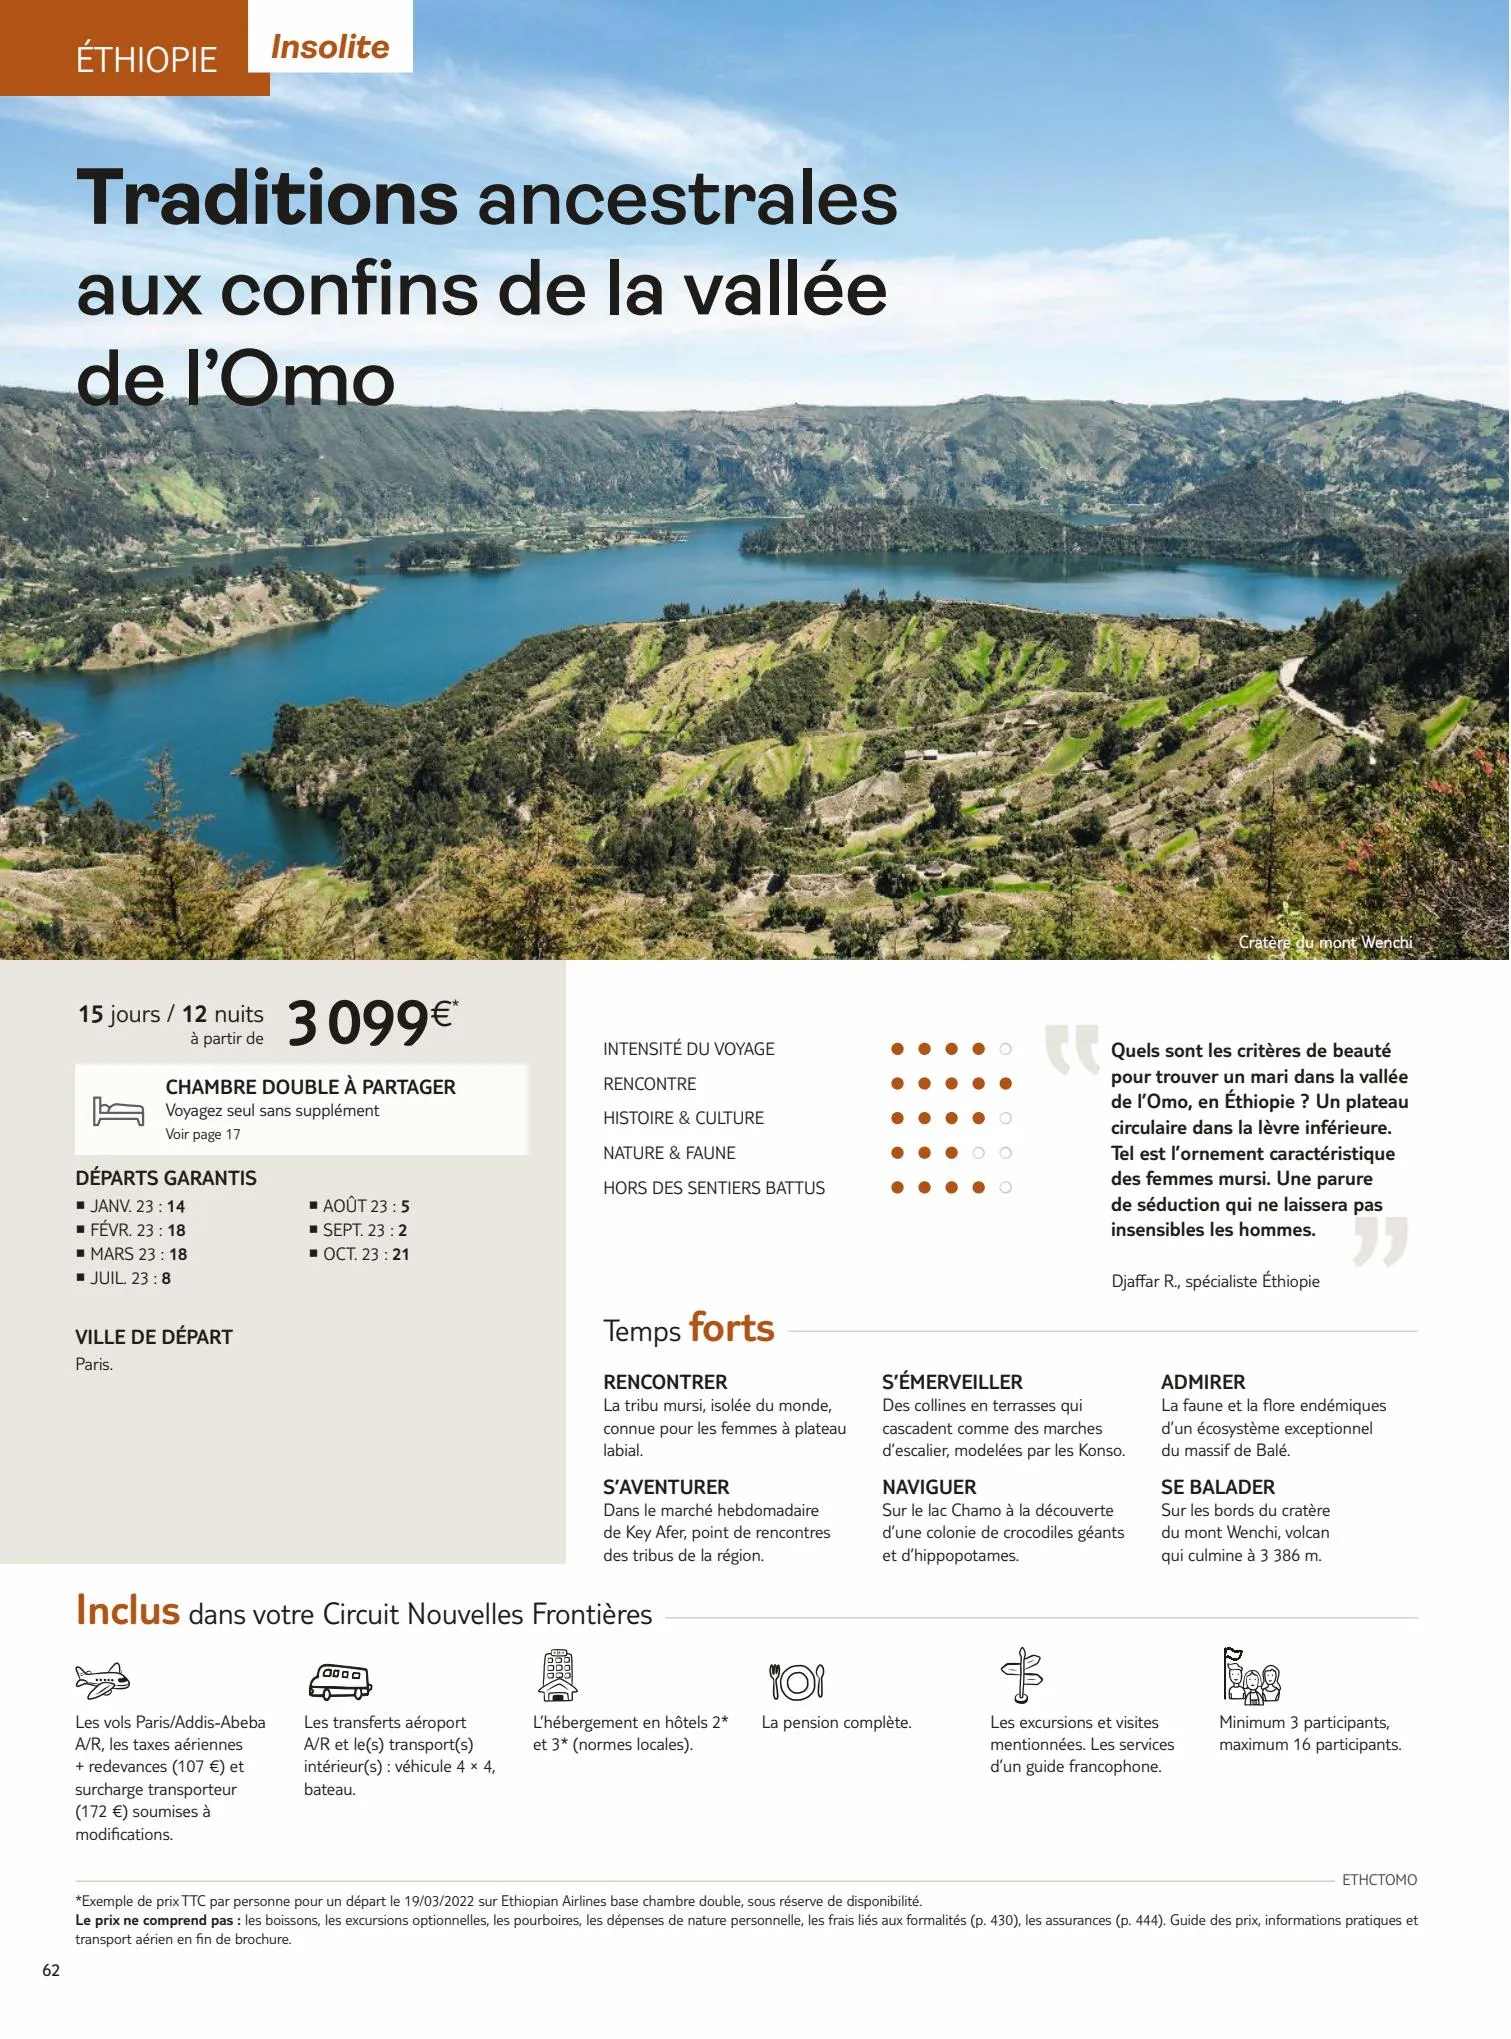 Catalogue TUI circuits nouvelles frontieres 2023, page 00064